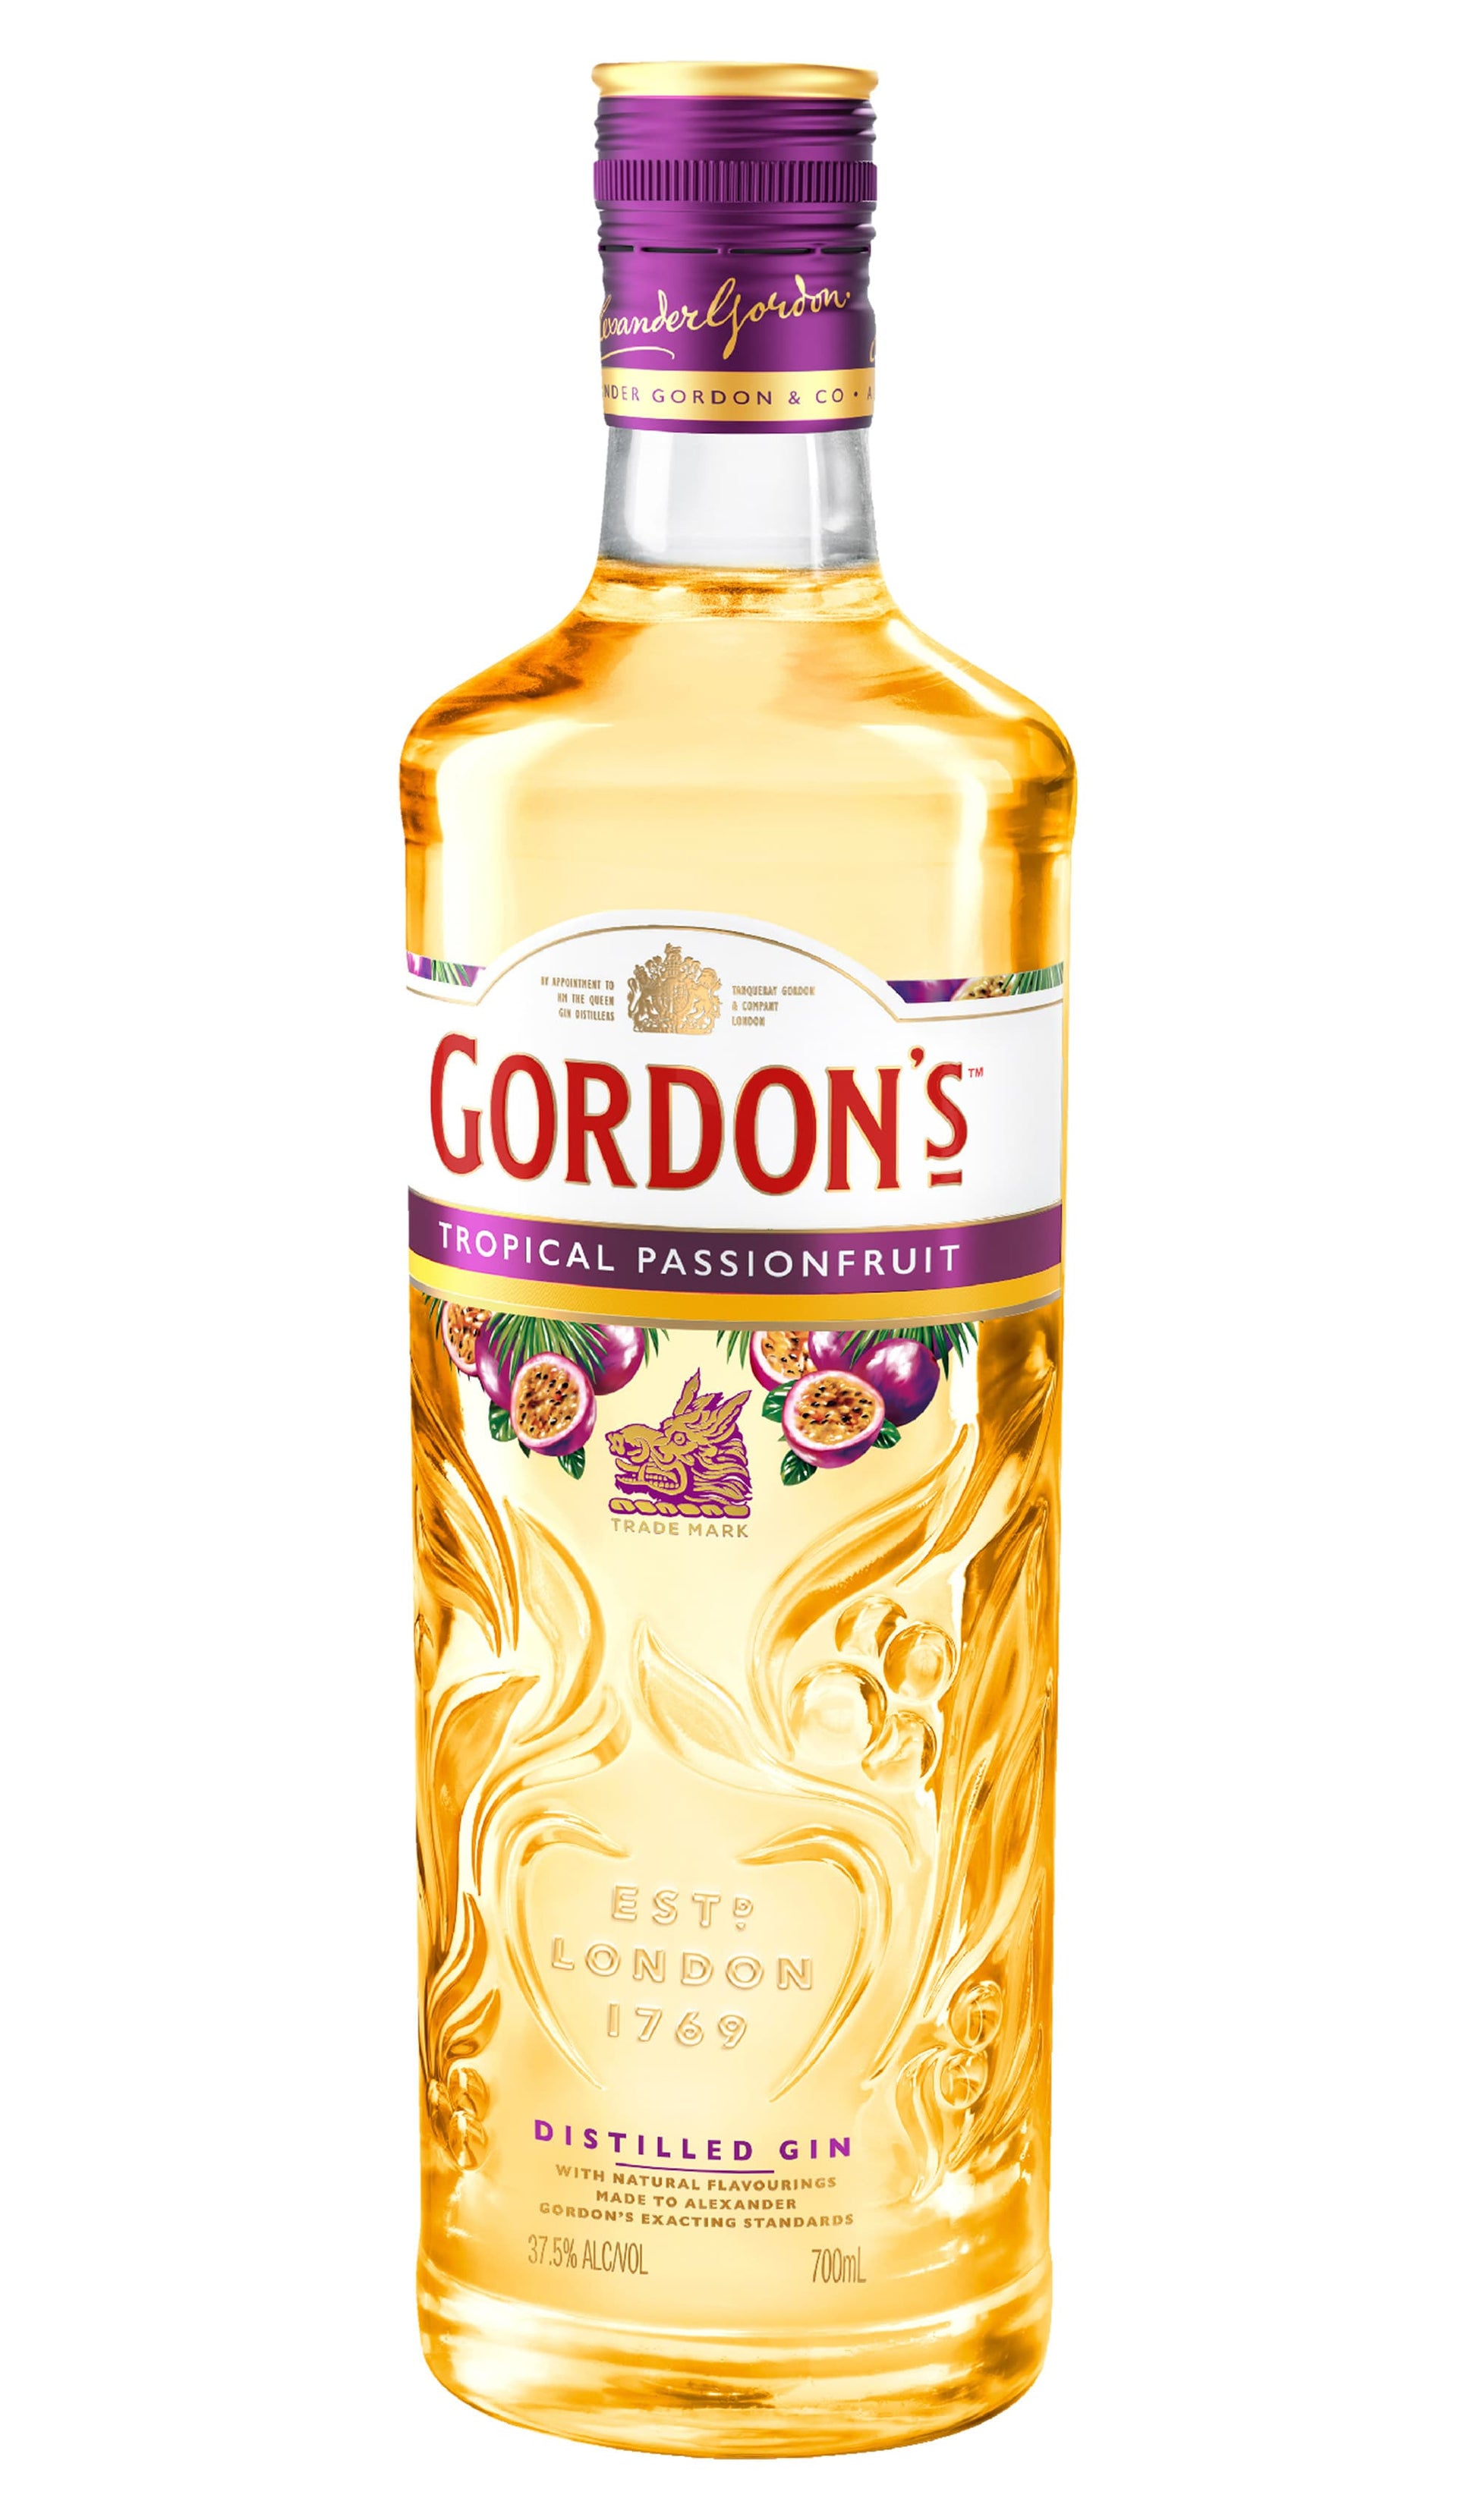 Find out more, explore the range, or buy Gordon's Tropical Passionfruit Gin 700mL available online at Wine Sellers Direct - Australia's independent liquor specialists.